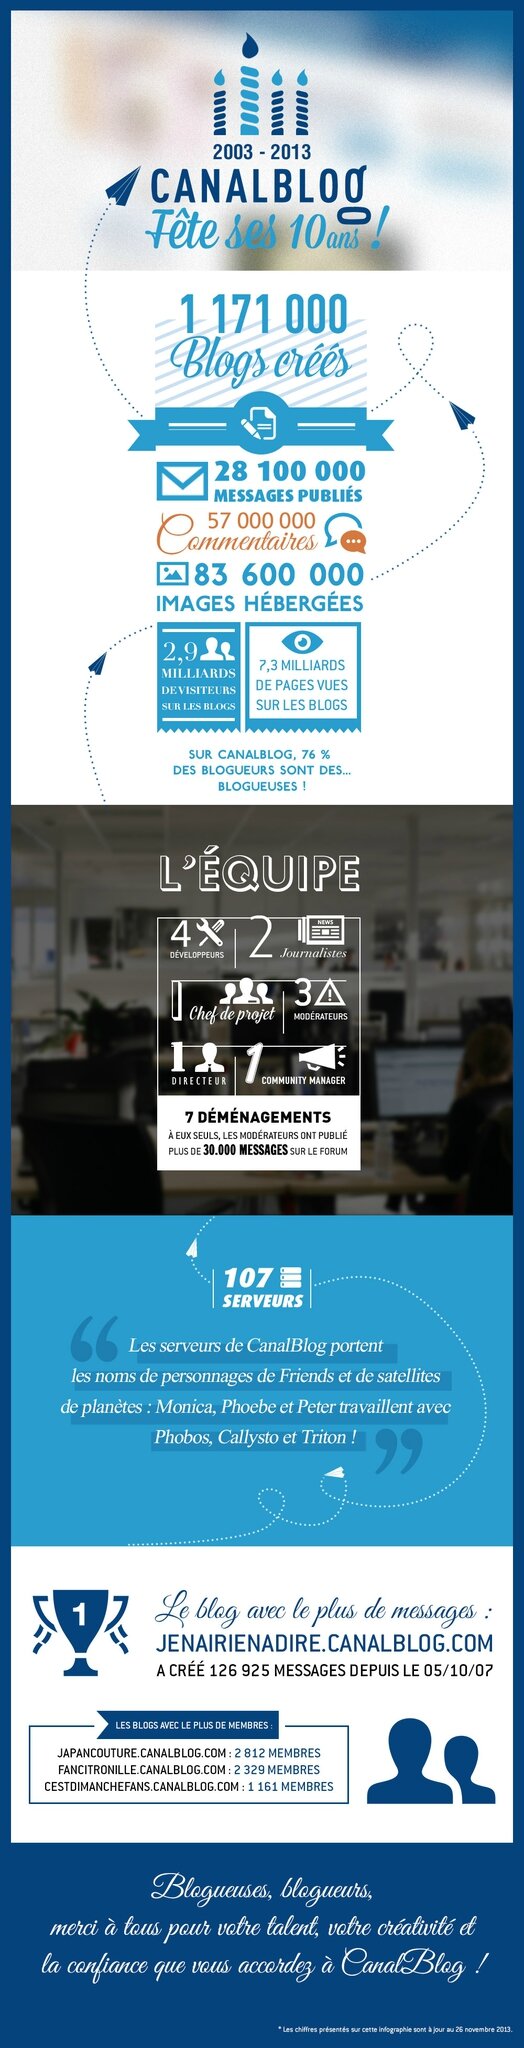 canalblog 10 ans infographie